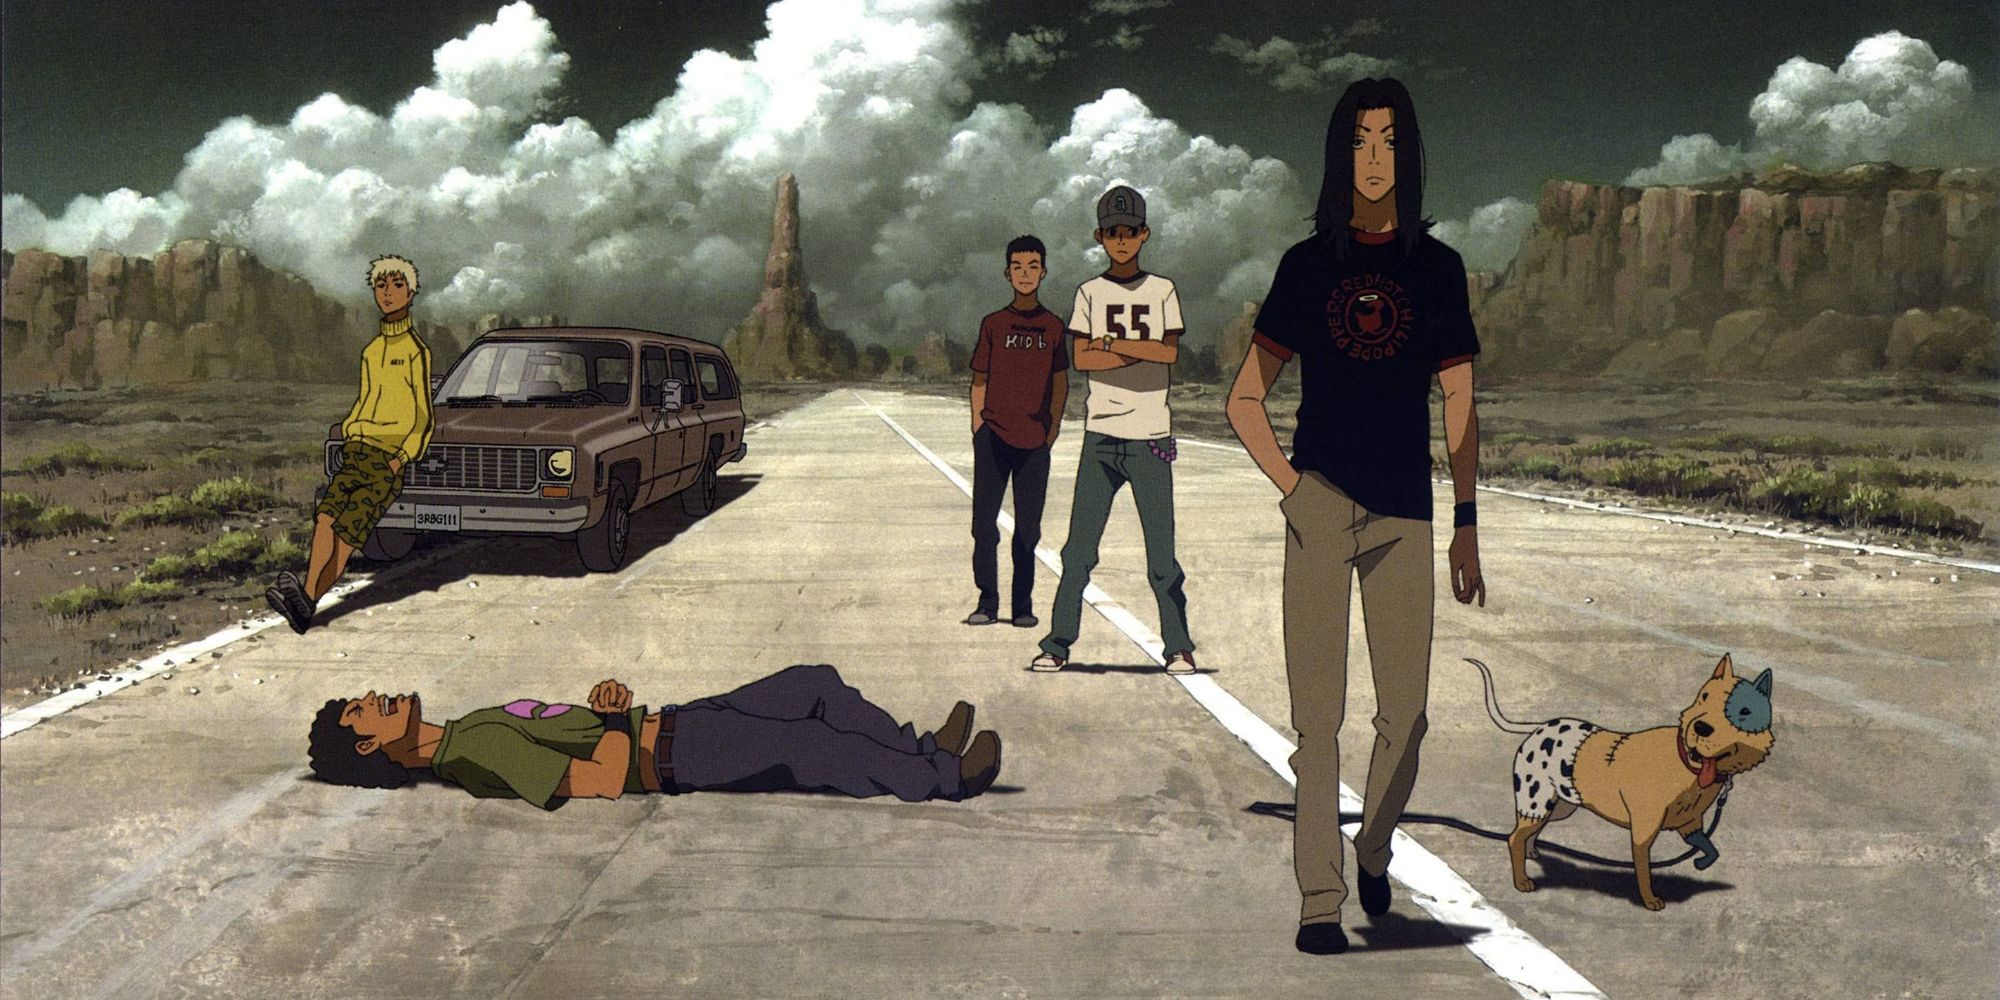 The dog and band from Beck: Mongolian Chop Squad hanging out on an empty road